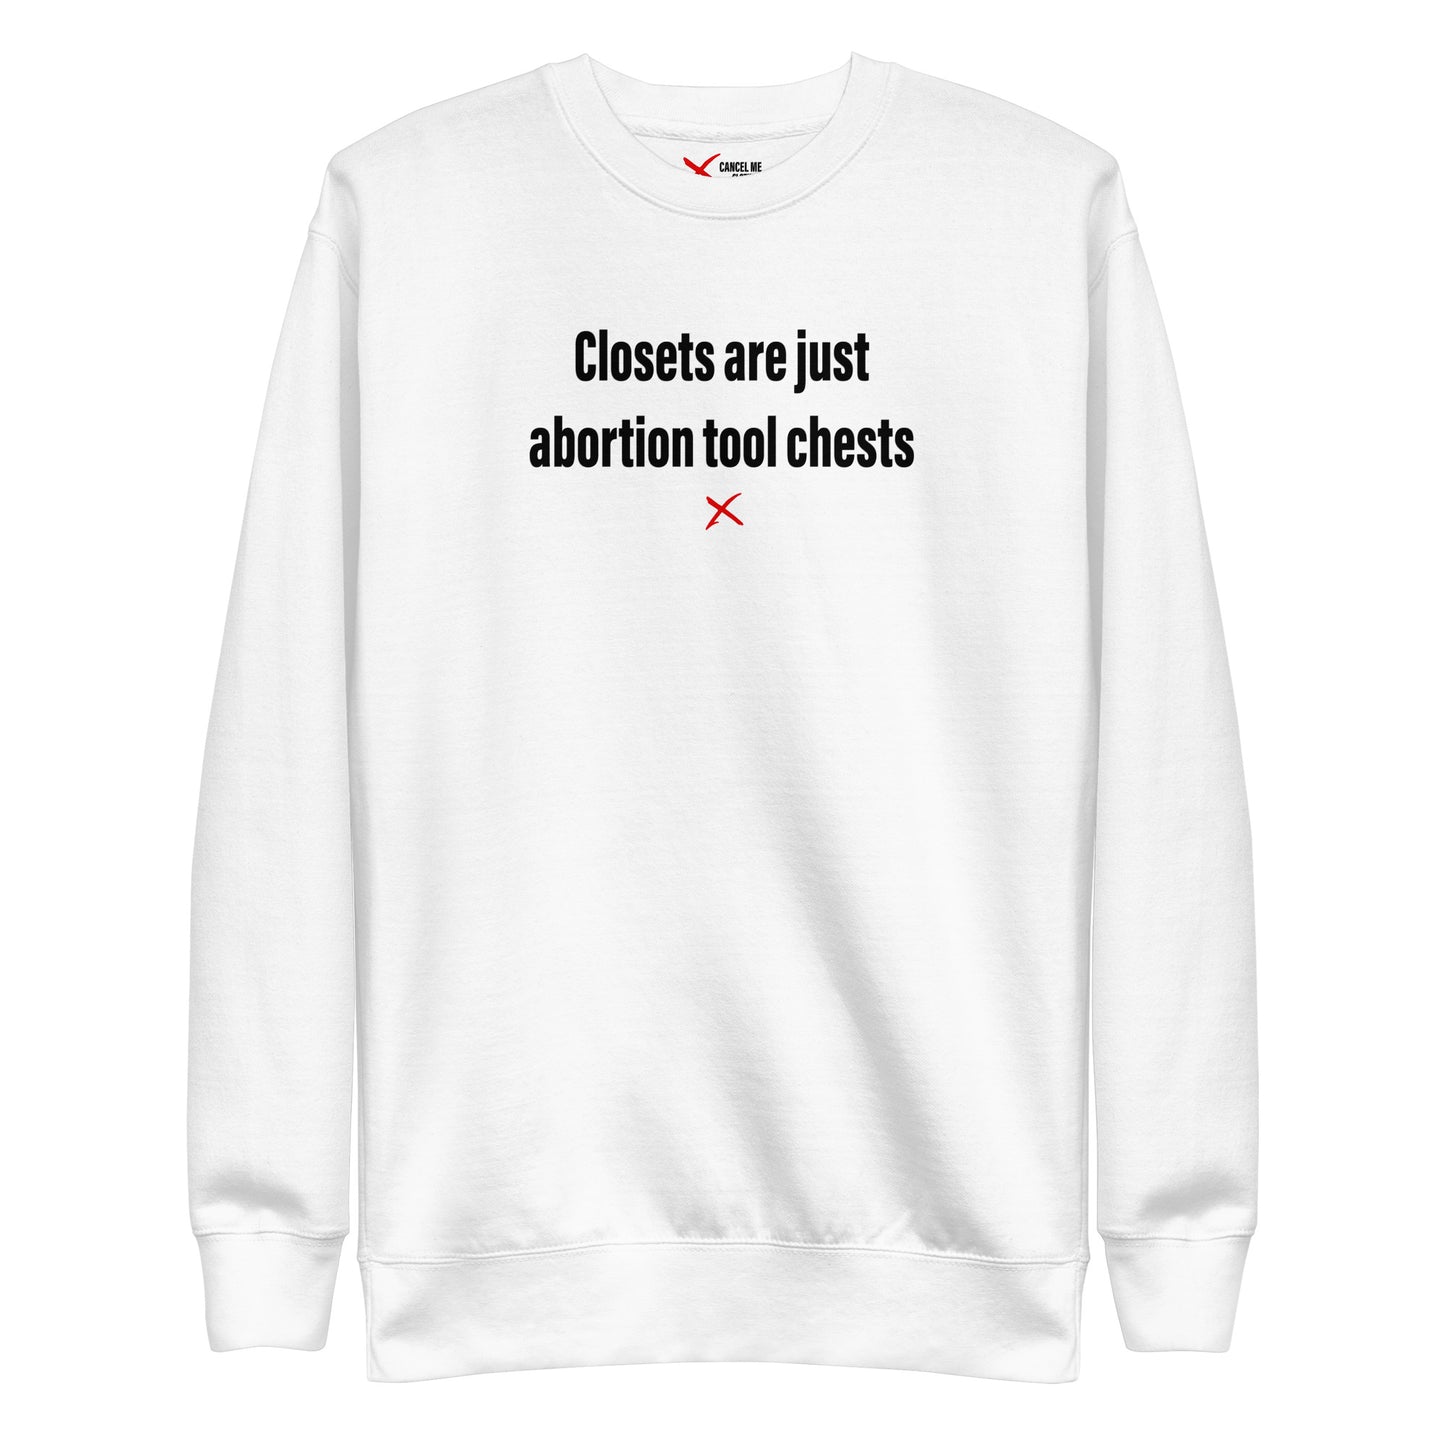 Closets are just abortion tool chests - Sweatshirt